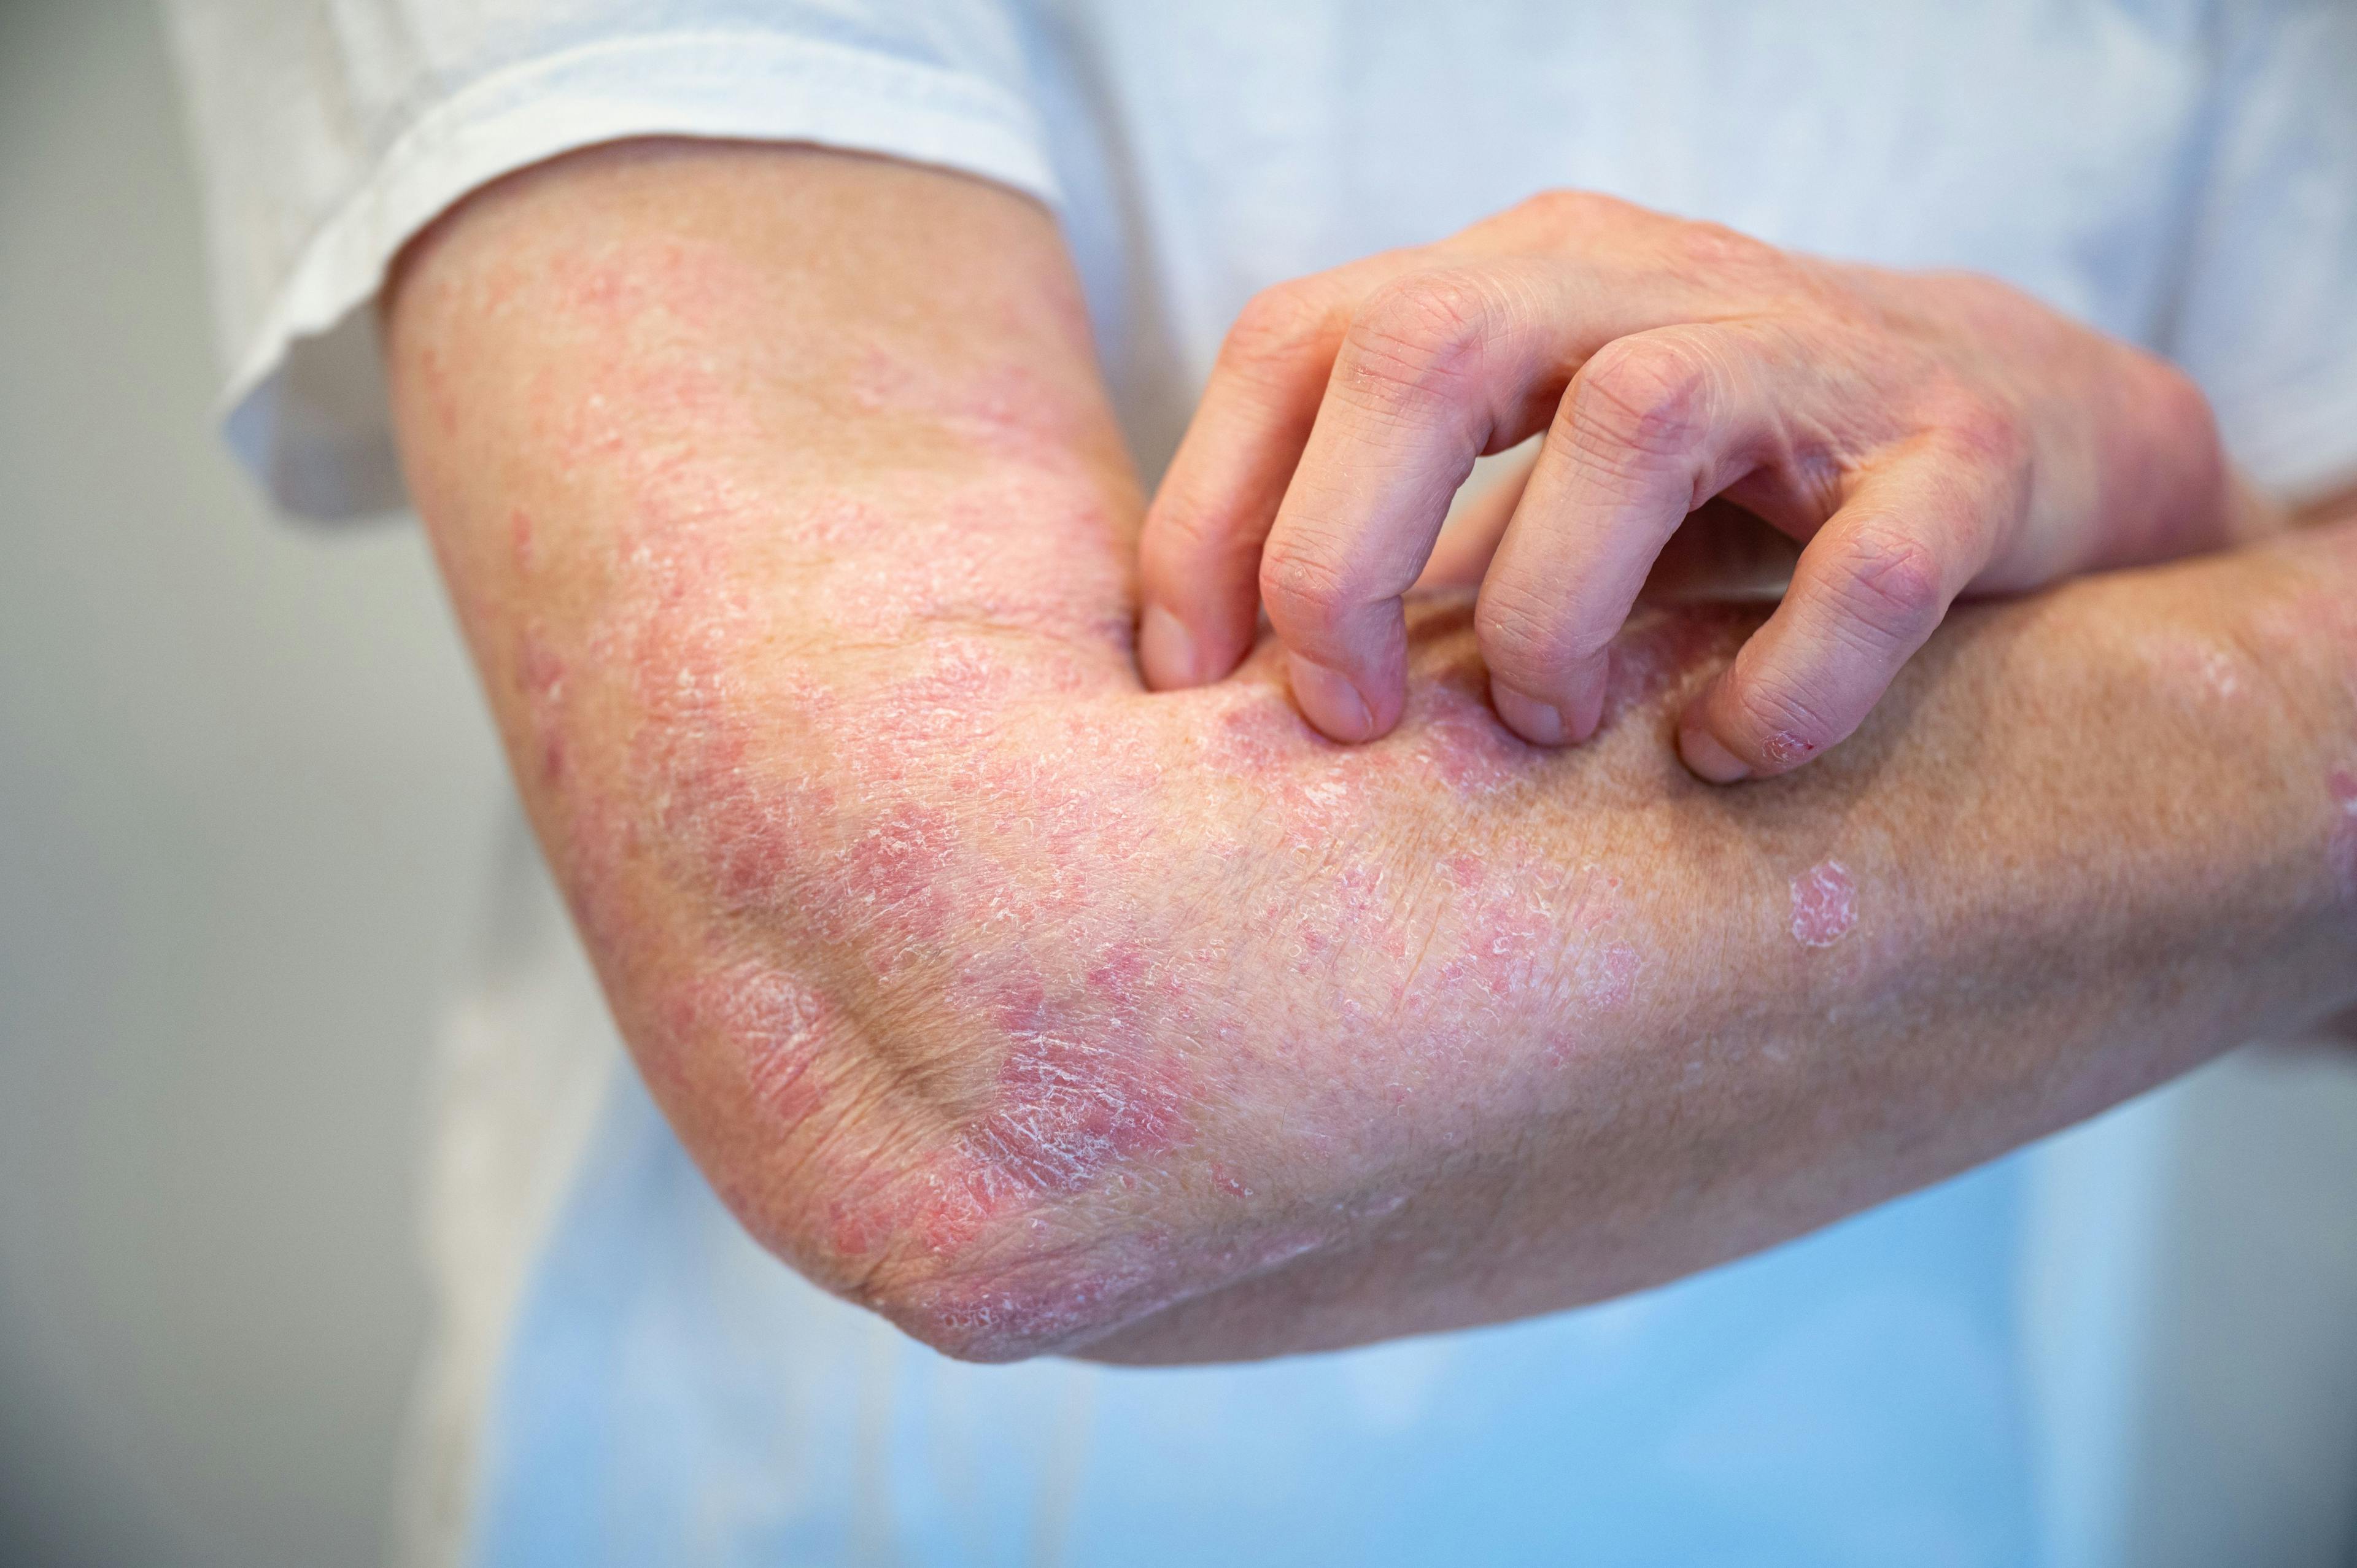 Oral Therapies Offer New Options for Patients With Psoriasis